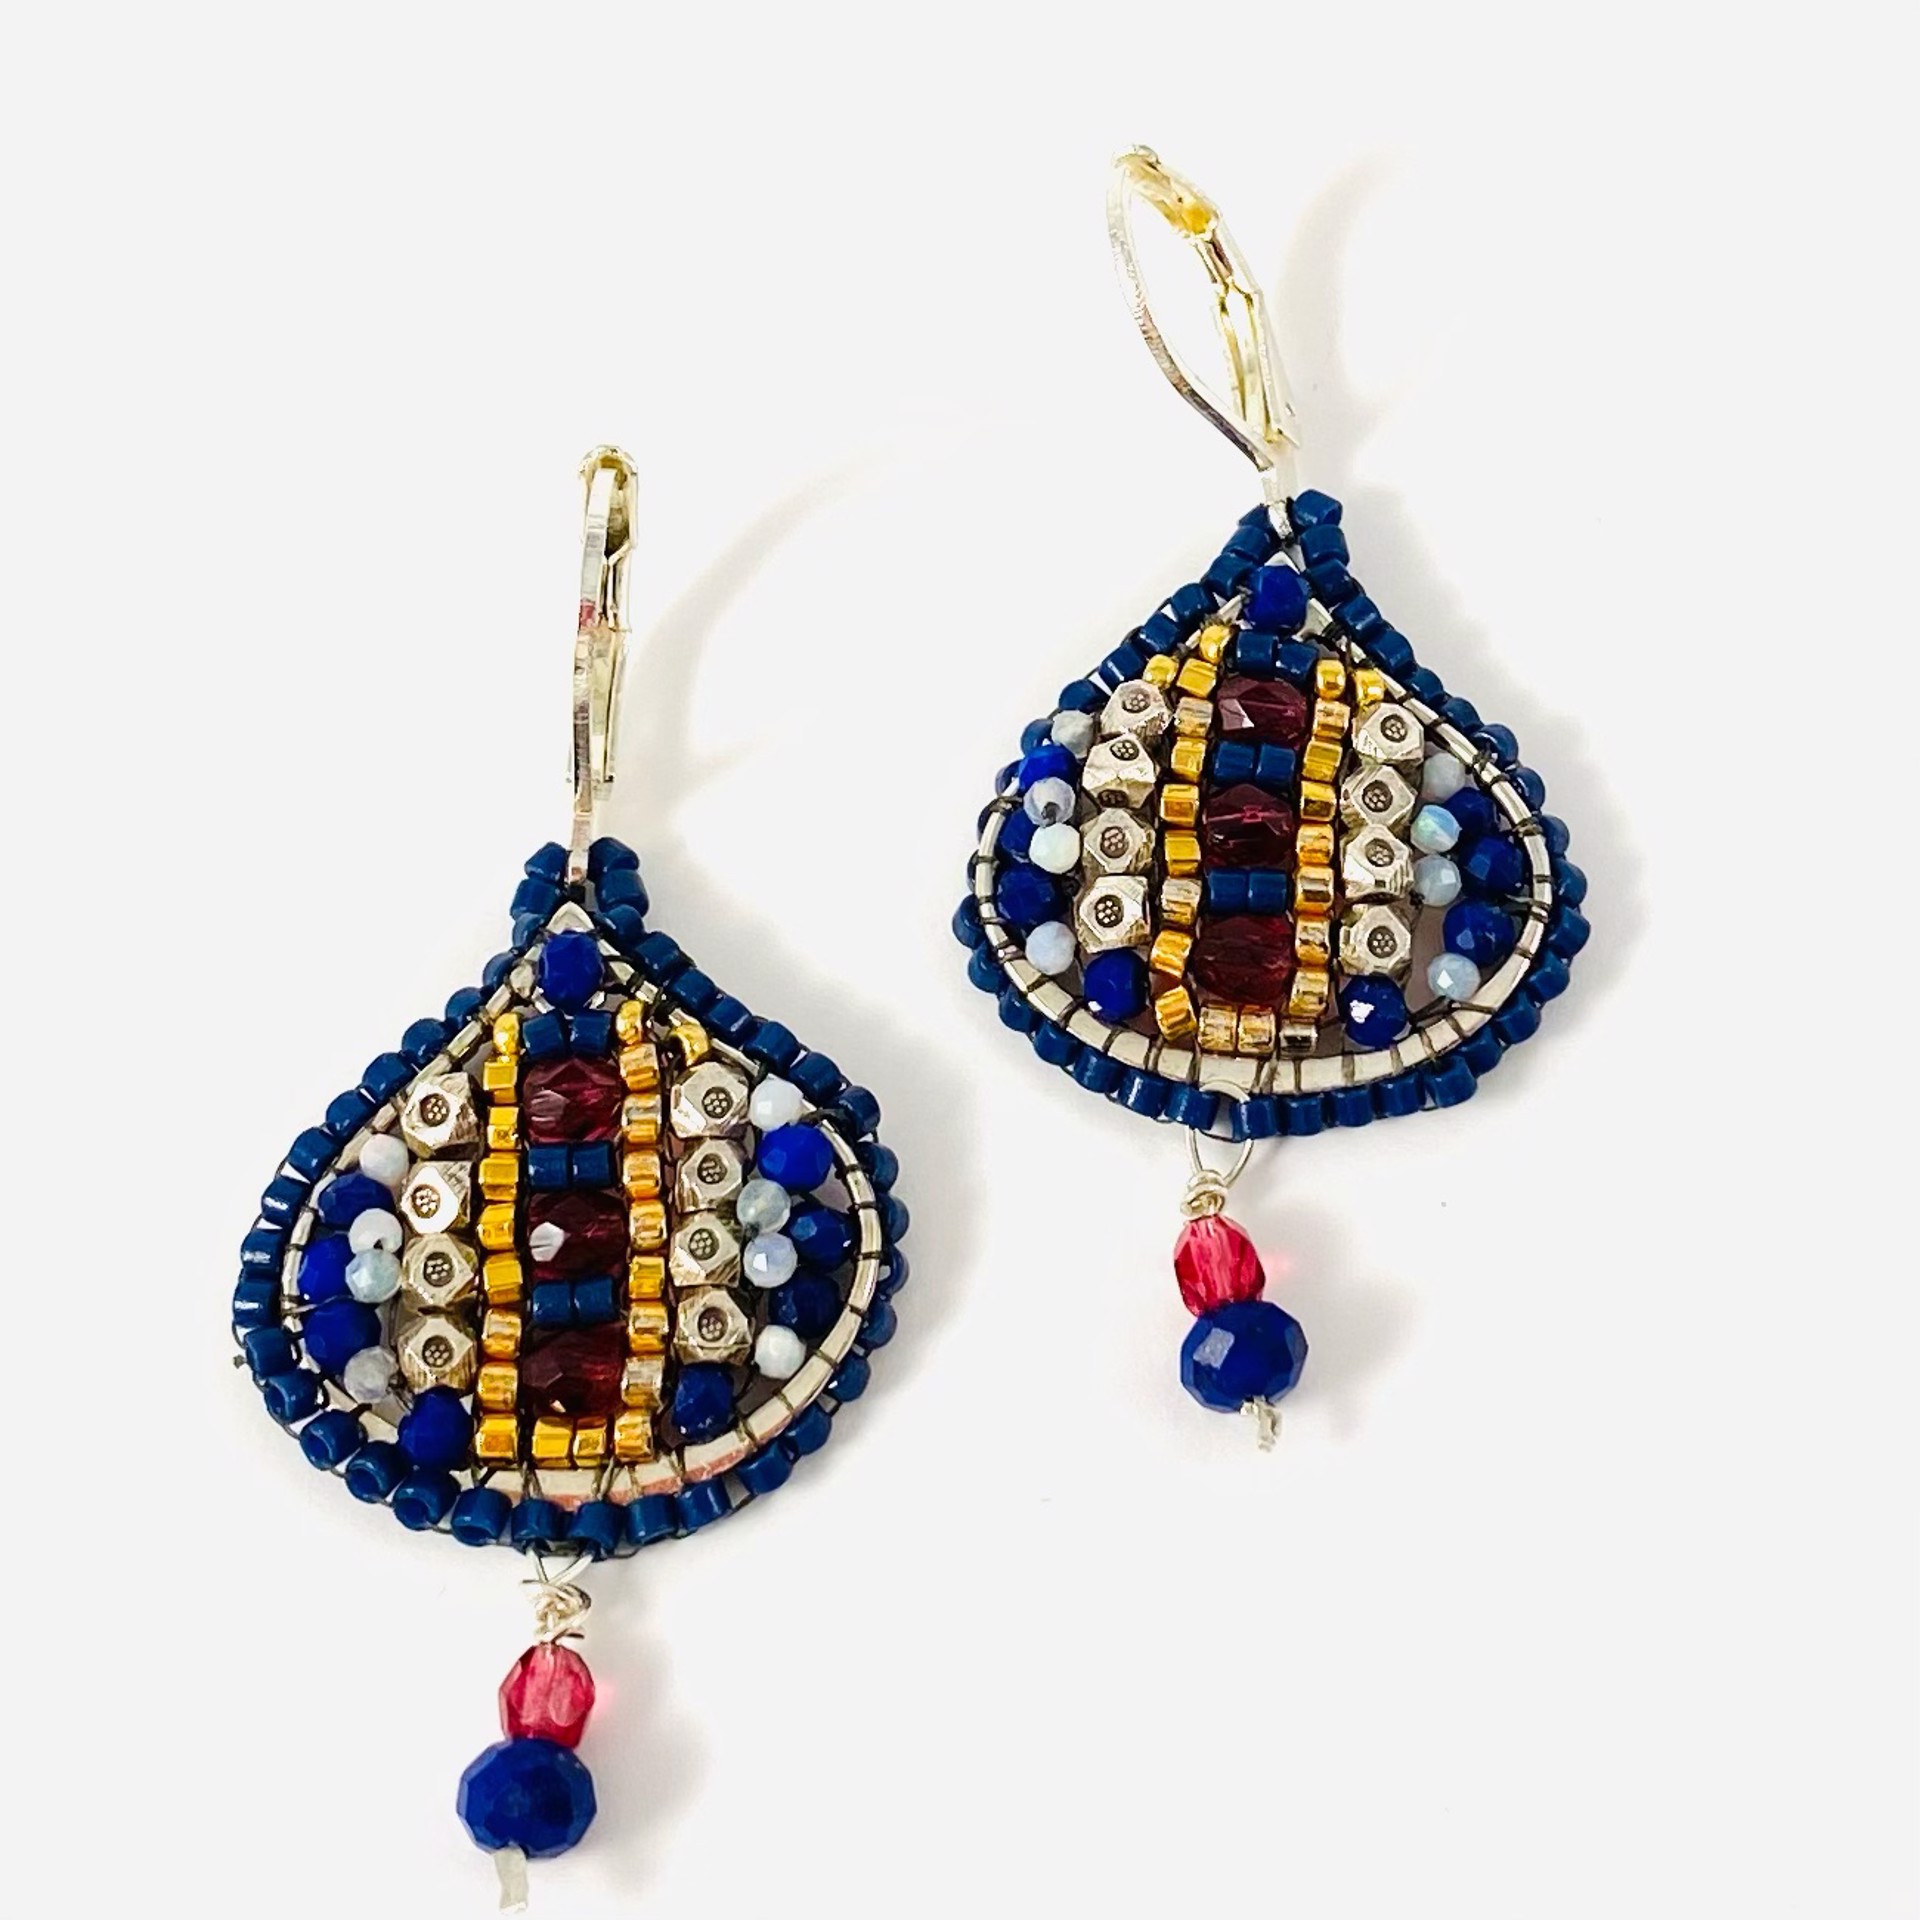 BD21-6 Lapis and Opal Earrings by Barbara Duimstra